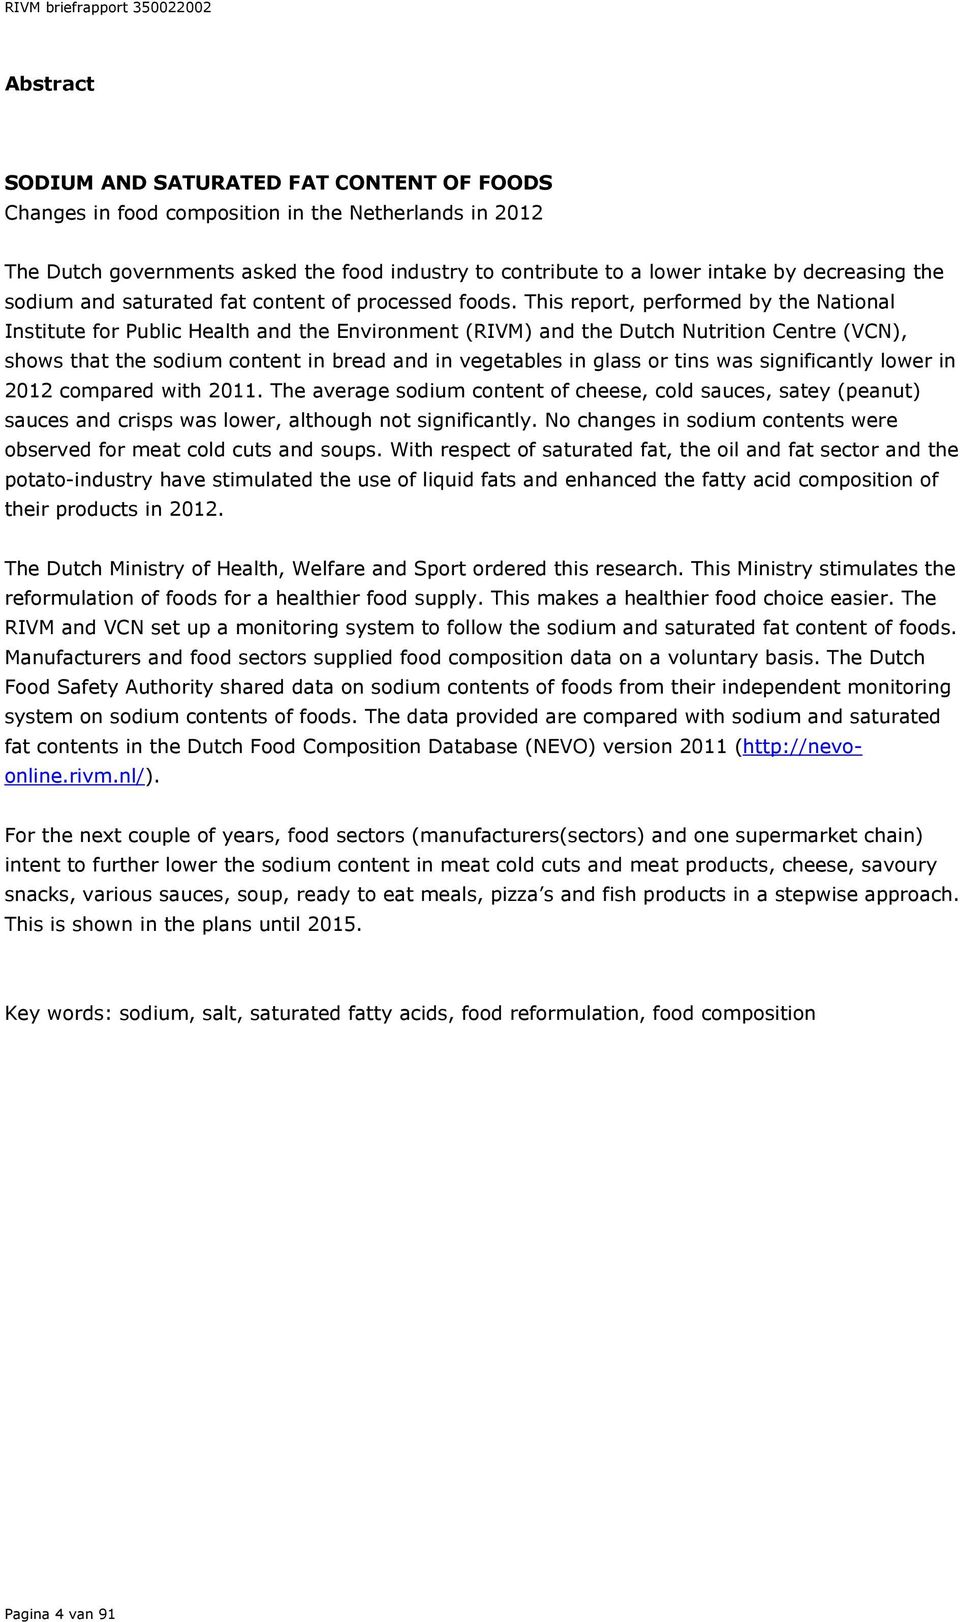 This report, performed by the National Institute for Public Health and the Environment (RIVM) and the Dutch Nutrition Centre (VCN), shows that the sodium content in bread and in vegetables in glass